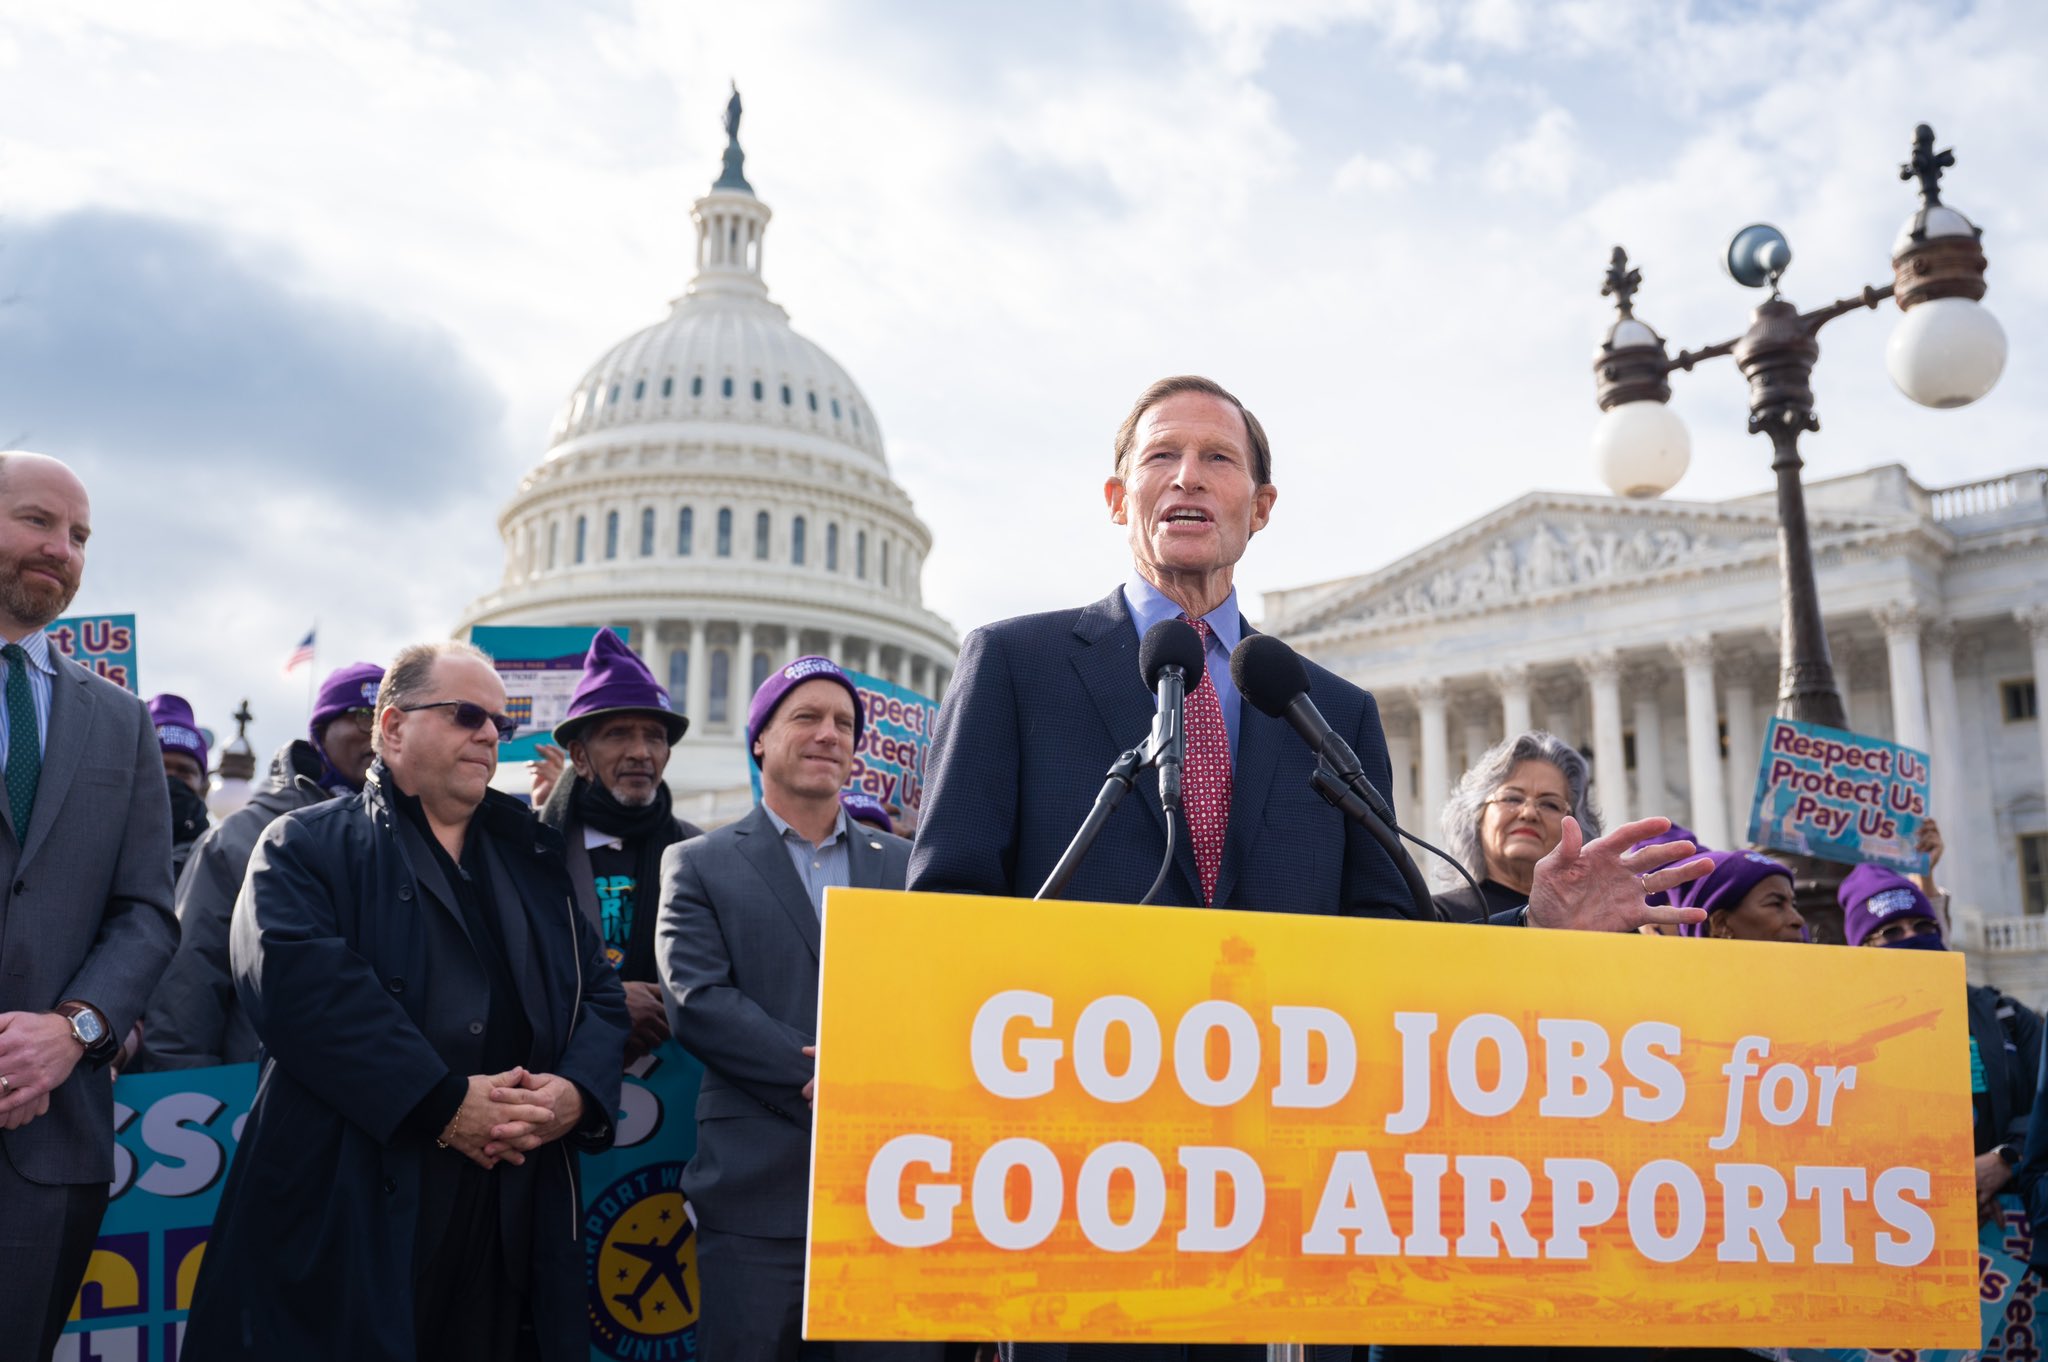 As part of a national day of action by airport workers in more than 15 cities across the country, Blumenthal joined airport workers at a press conference urging Congress to pass the Good Jobs for Good Airports Act. 